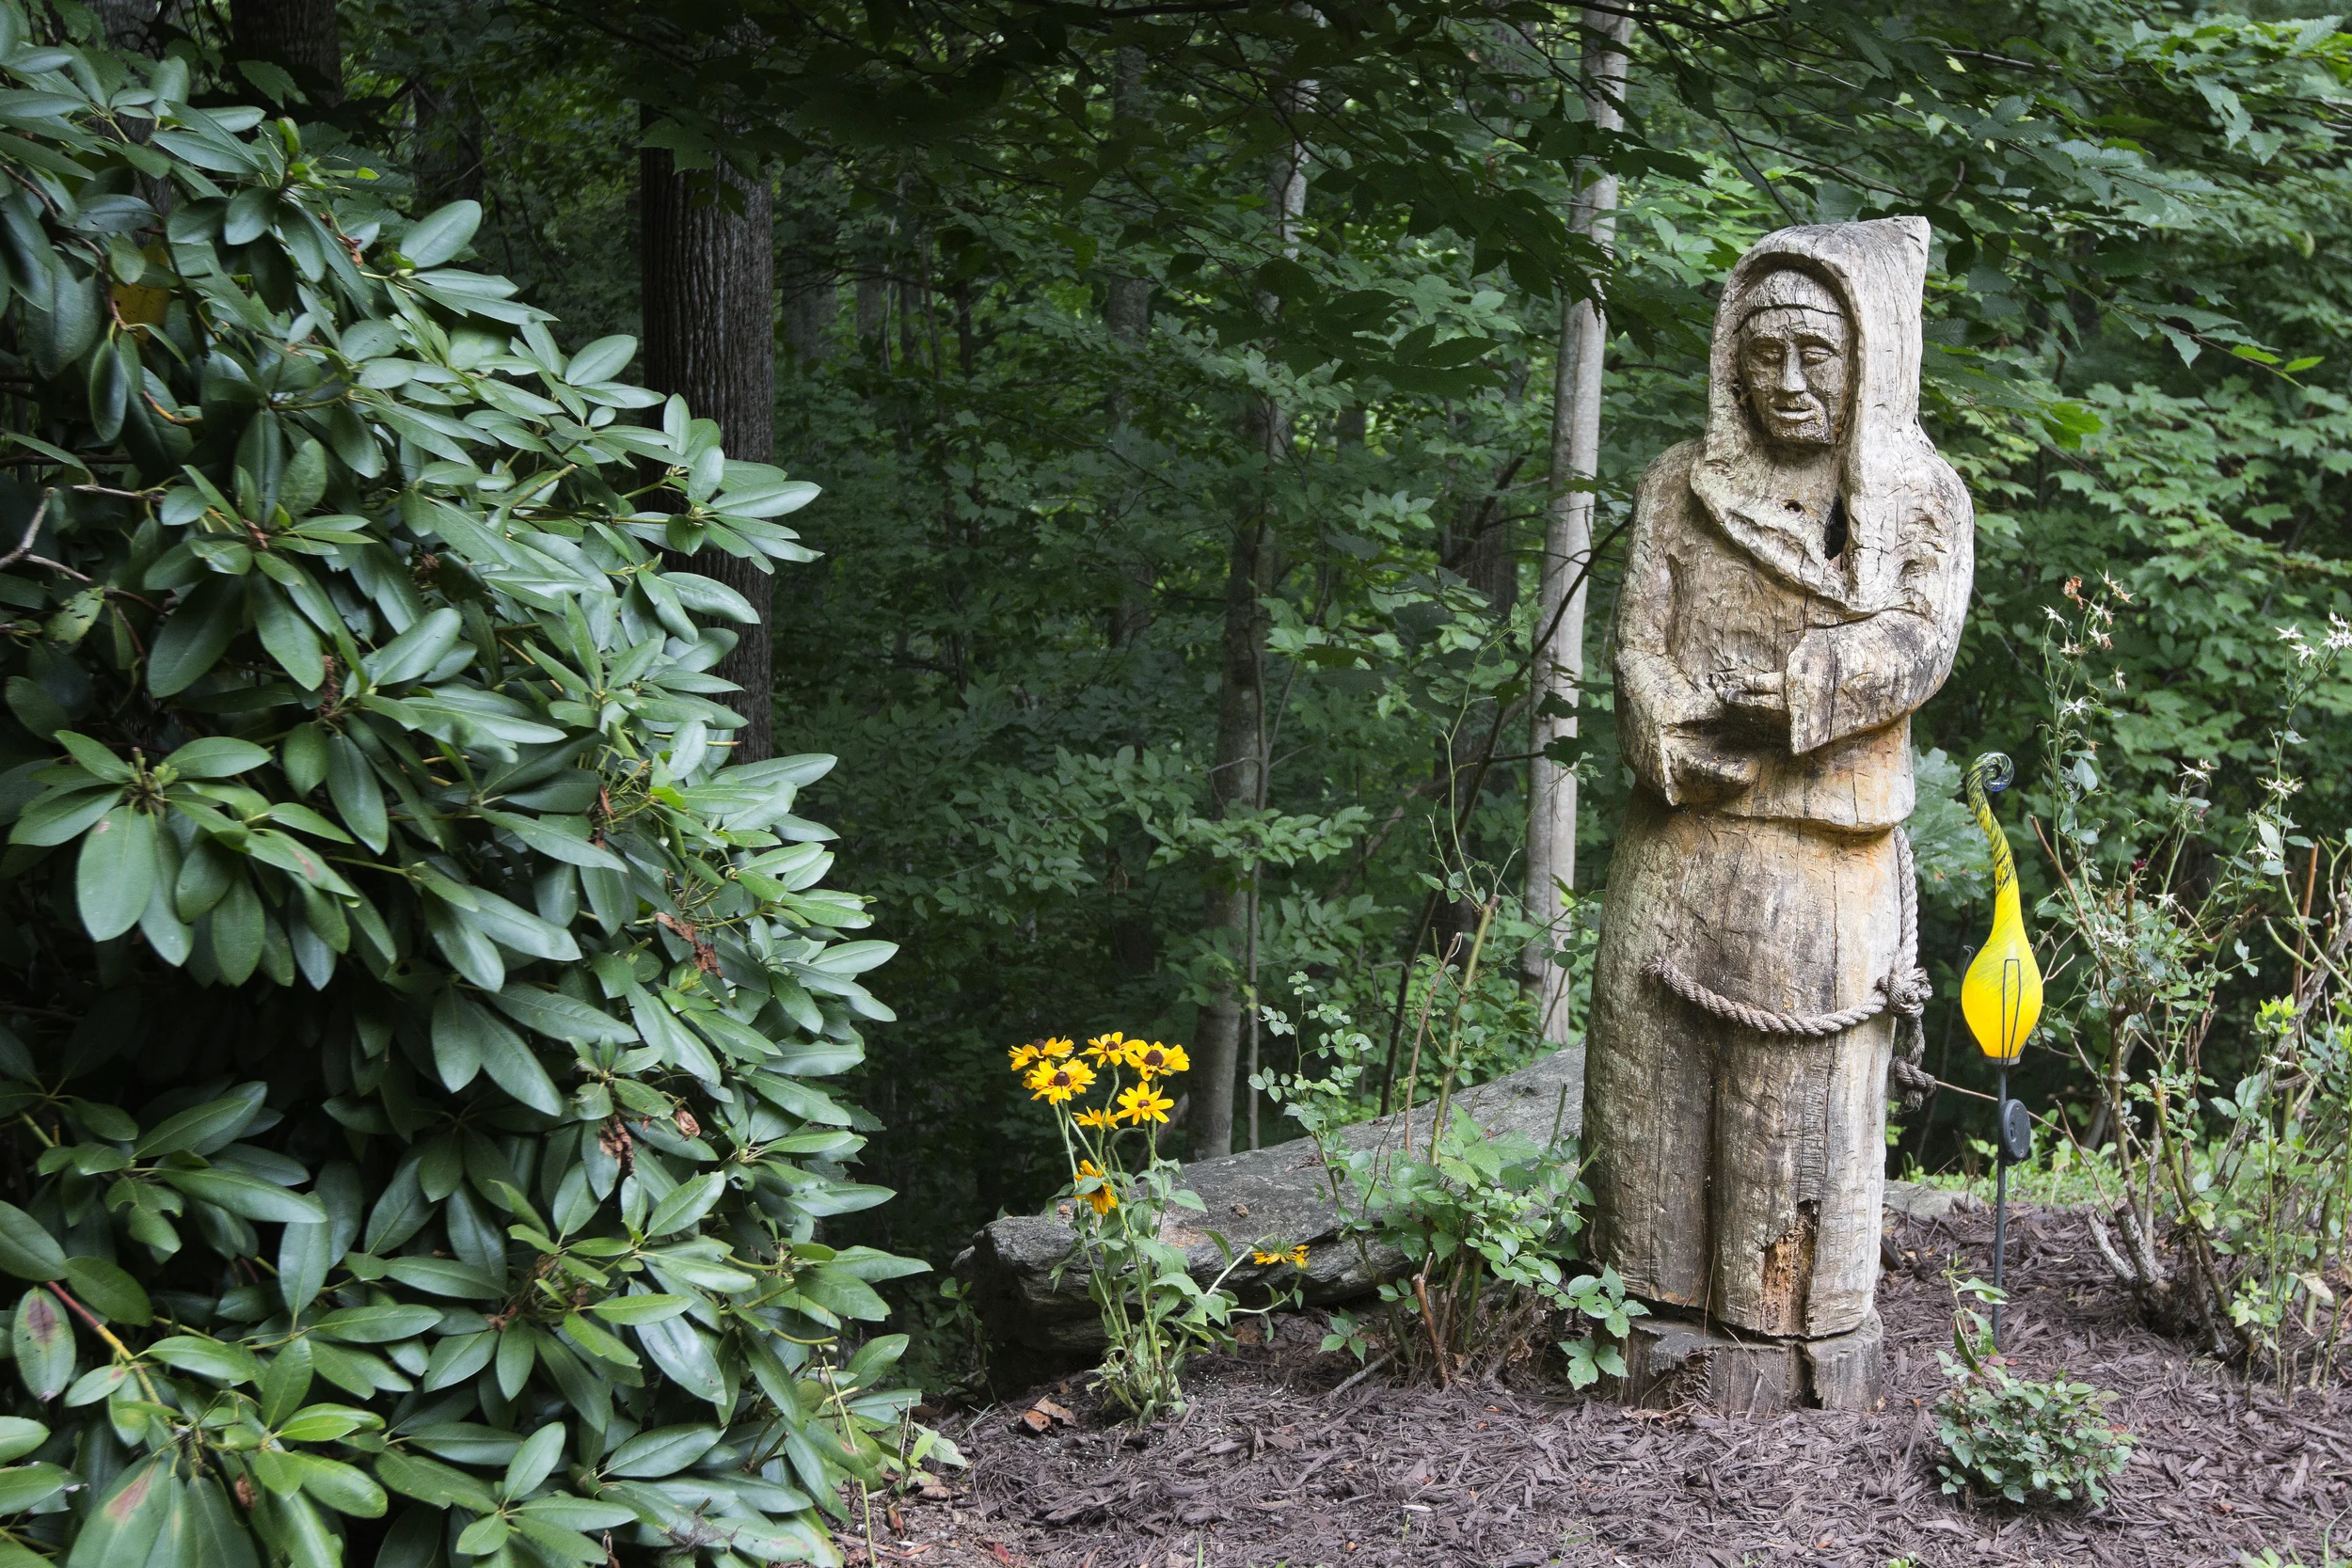 Large five foot high wood carving of a Monk in the front gardens.